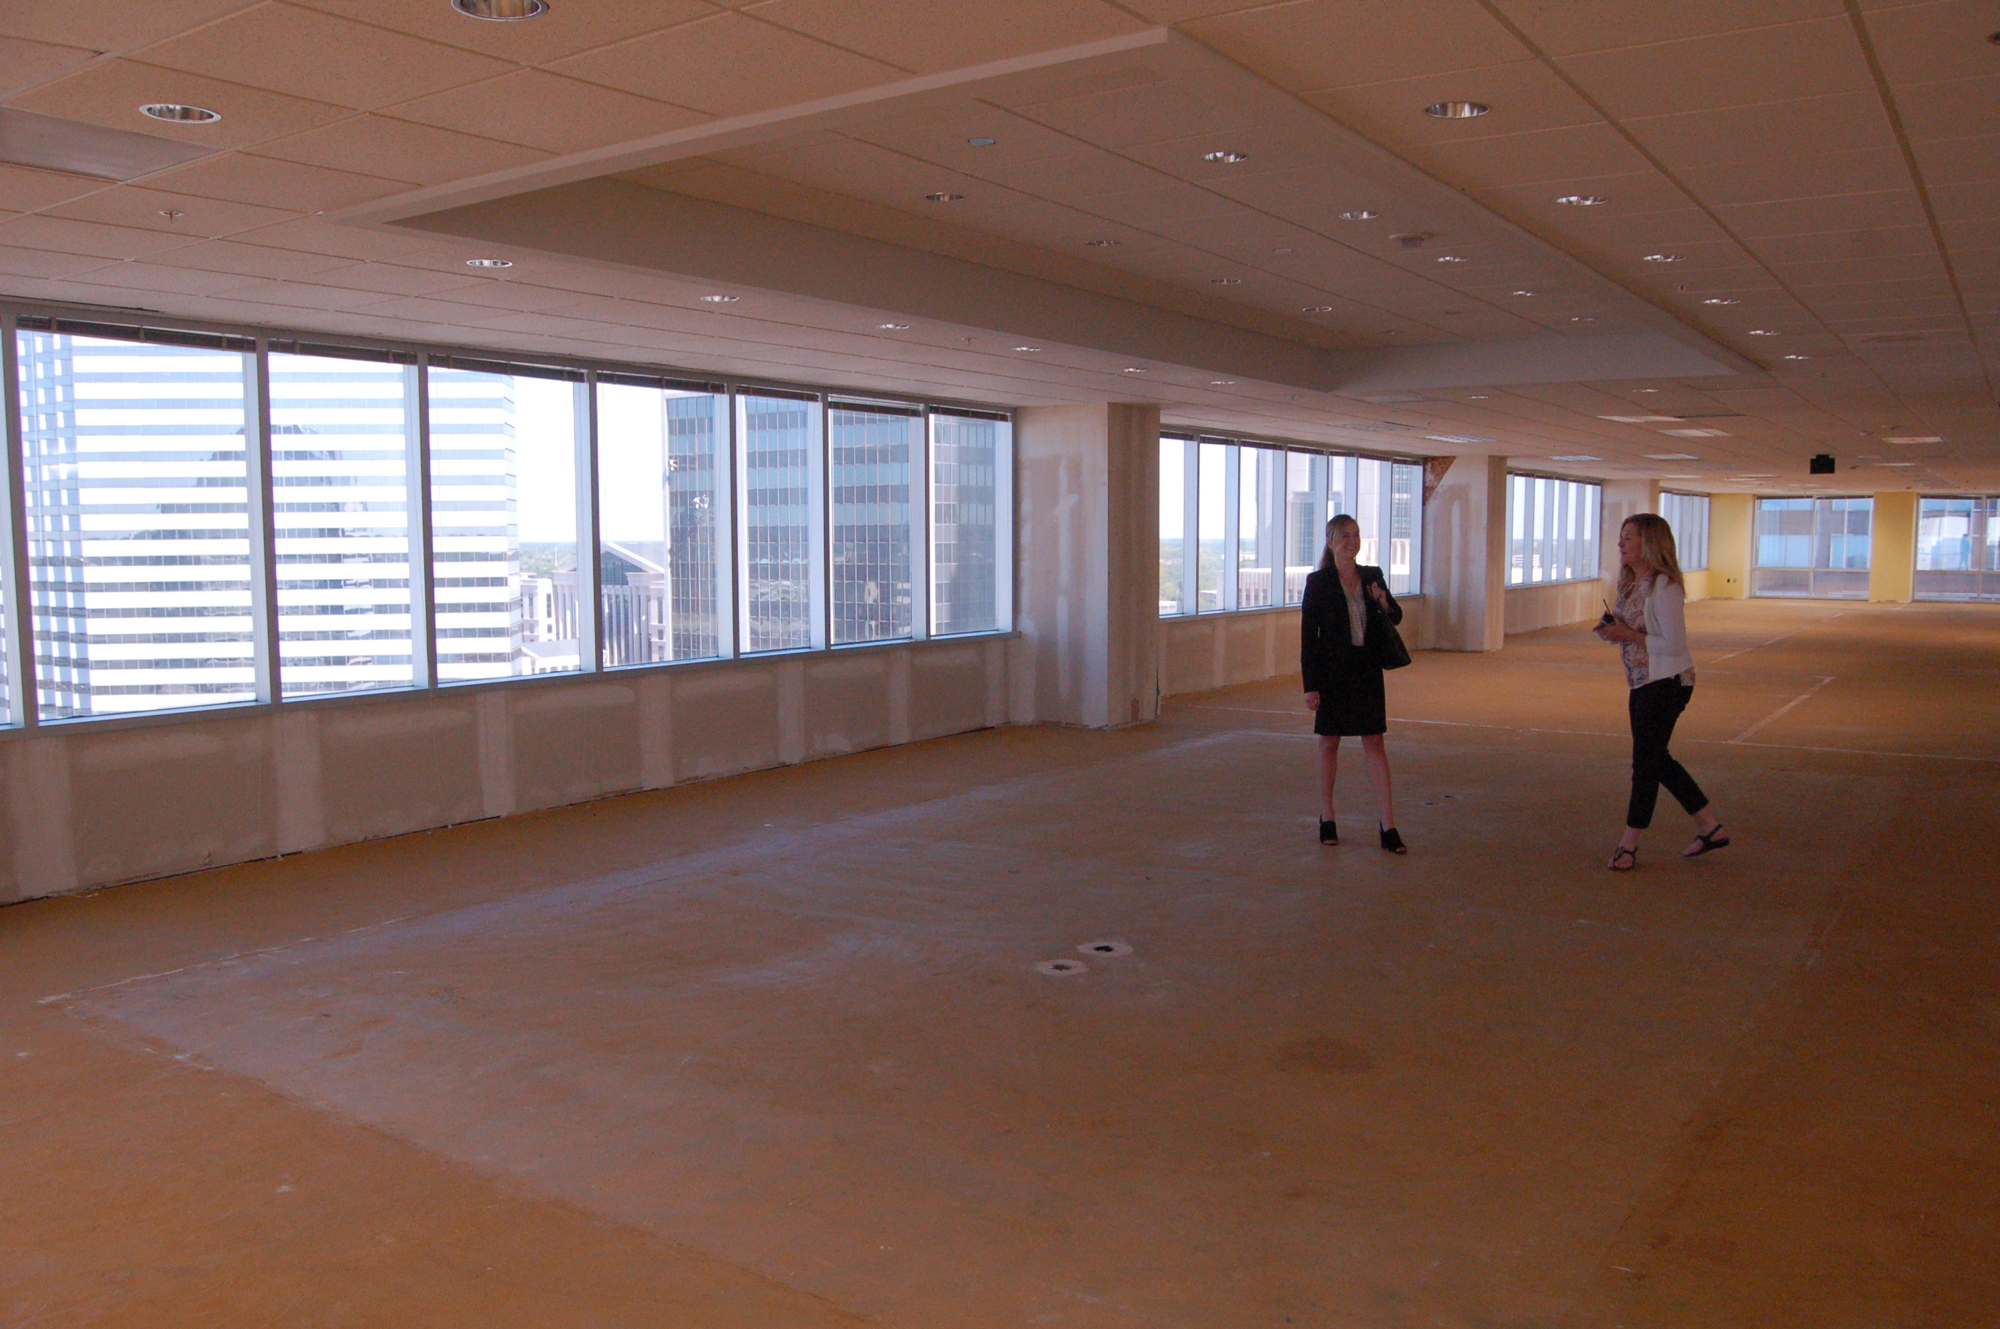 Some floors at SunTrust Tower offer nearly 20,000 square feet of Class-A office space ready for build-out with east, south and west views of the Downtown skyline and St. Johns River.